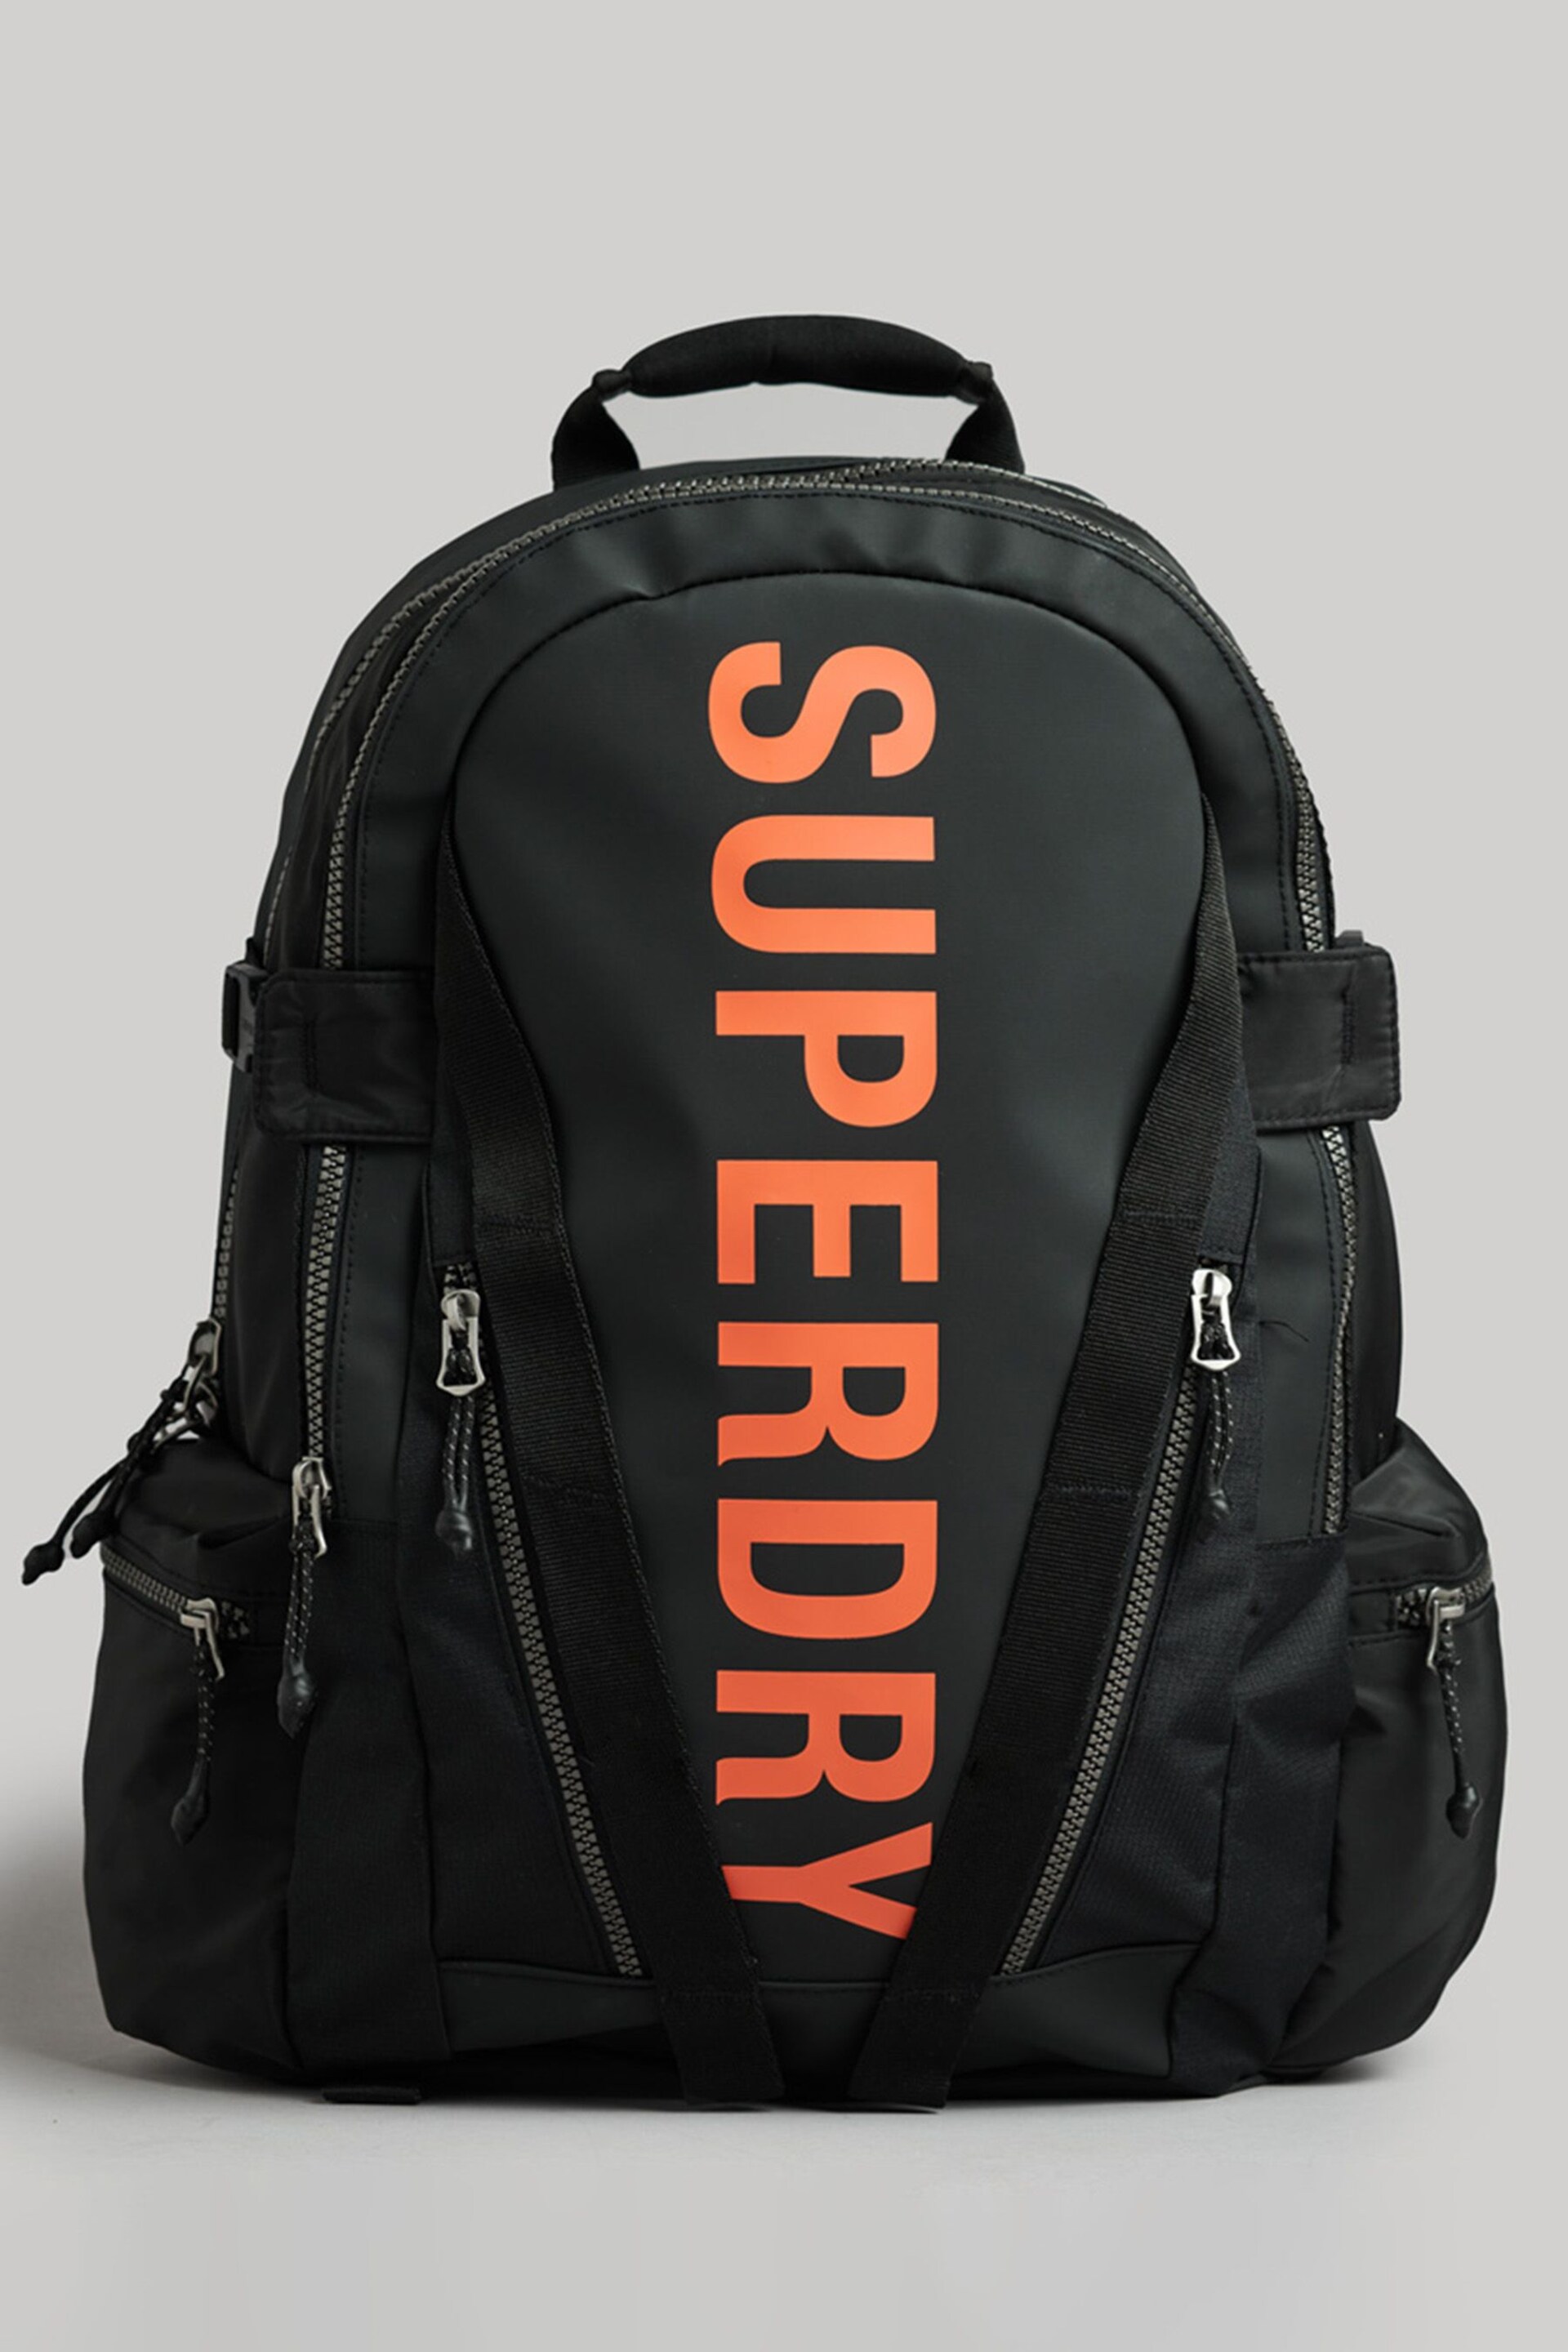 Superdry Black Mountain Tarp Graphic Backpack - Image 1 of 7